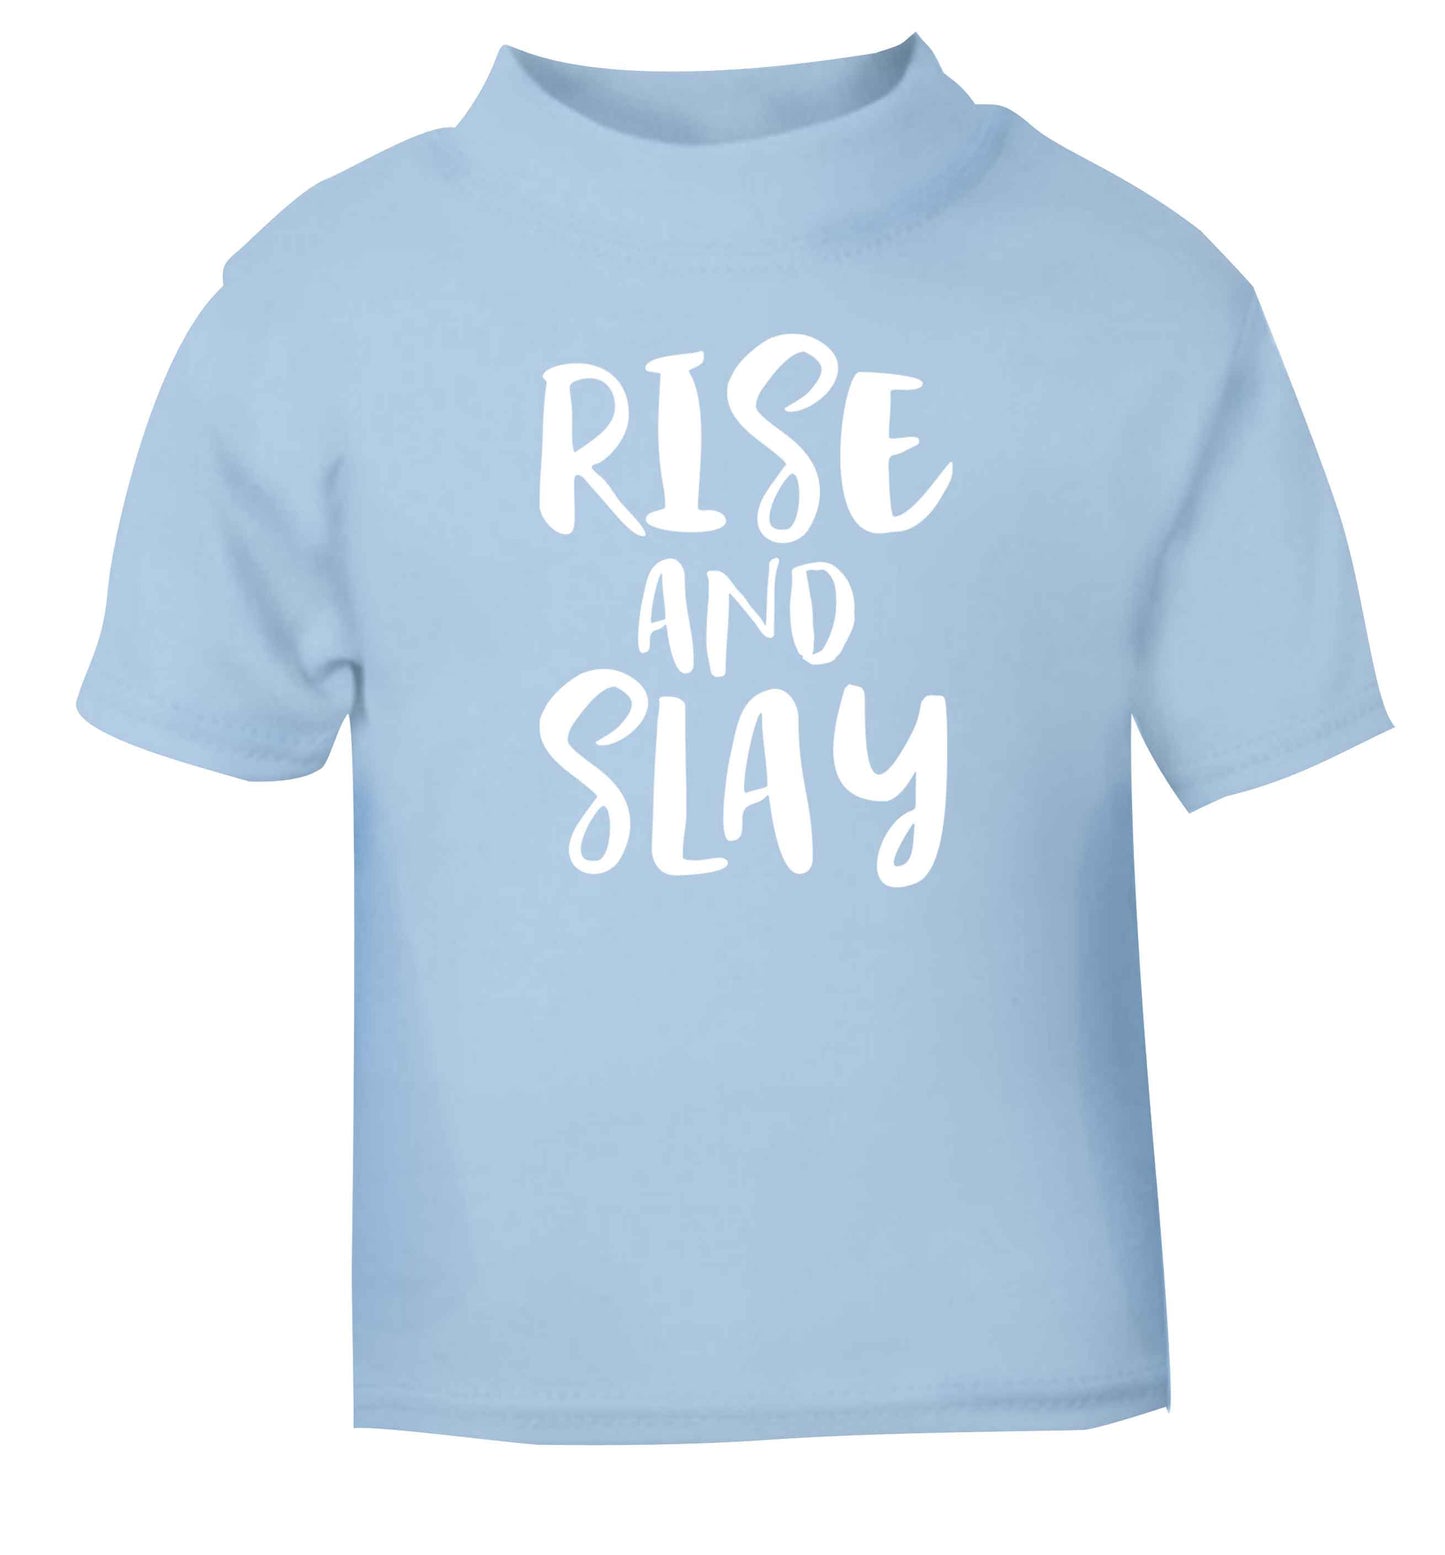 Rise and slay light blue Baby Toddler Tshirt 2 Years